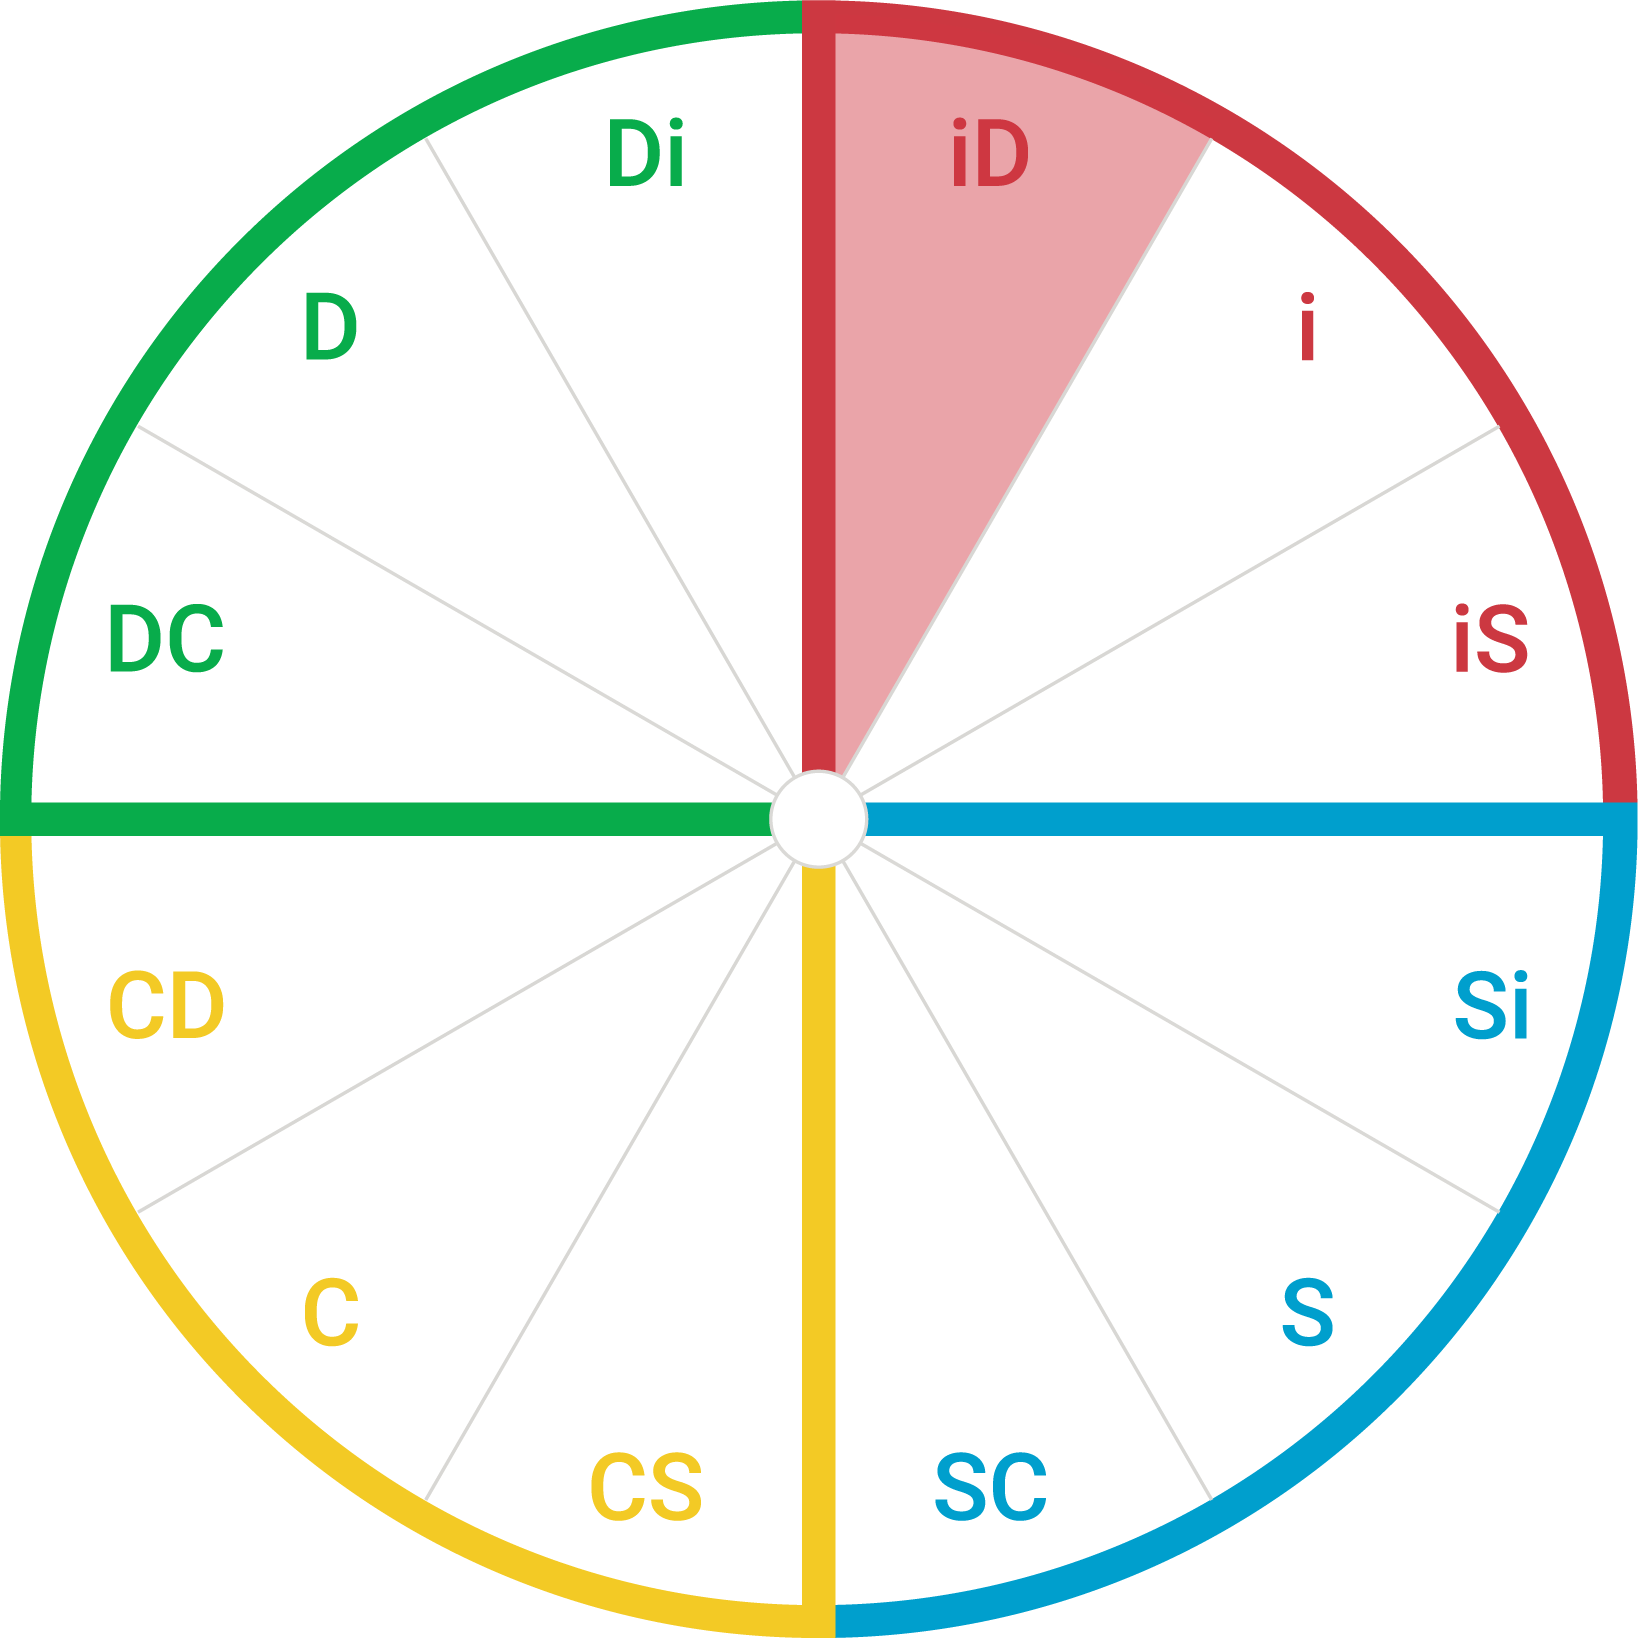 DiSC map showing the iD style